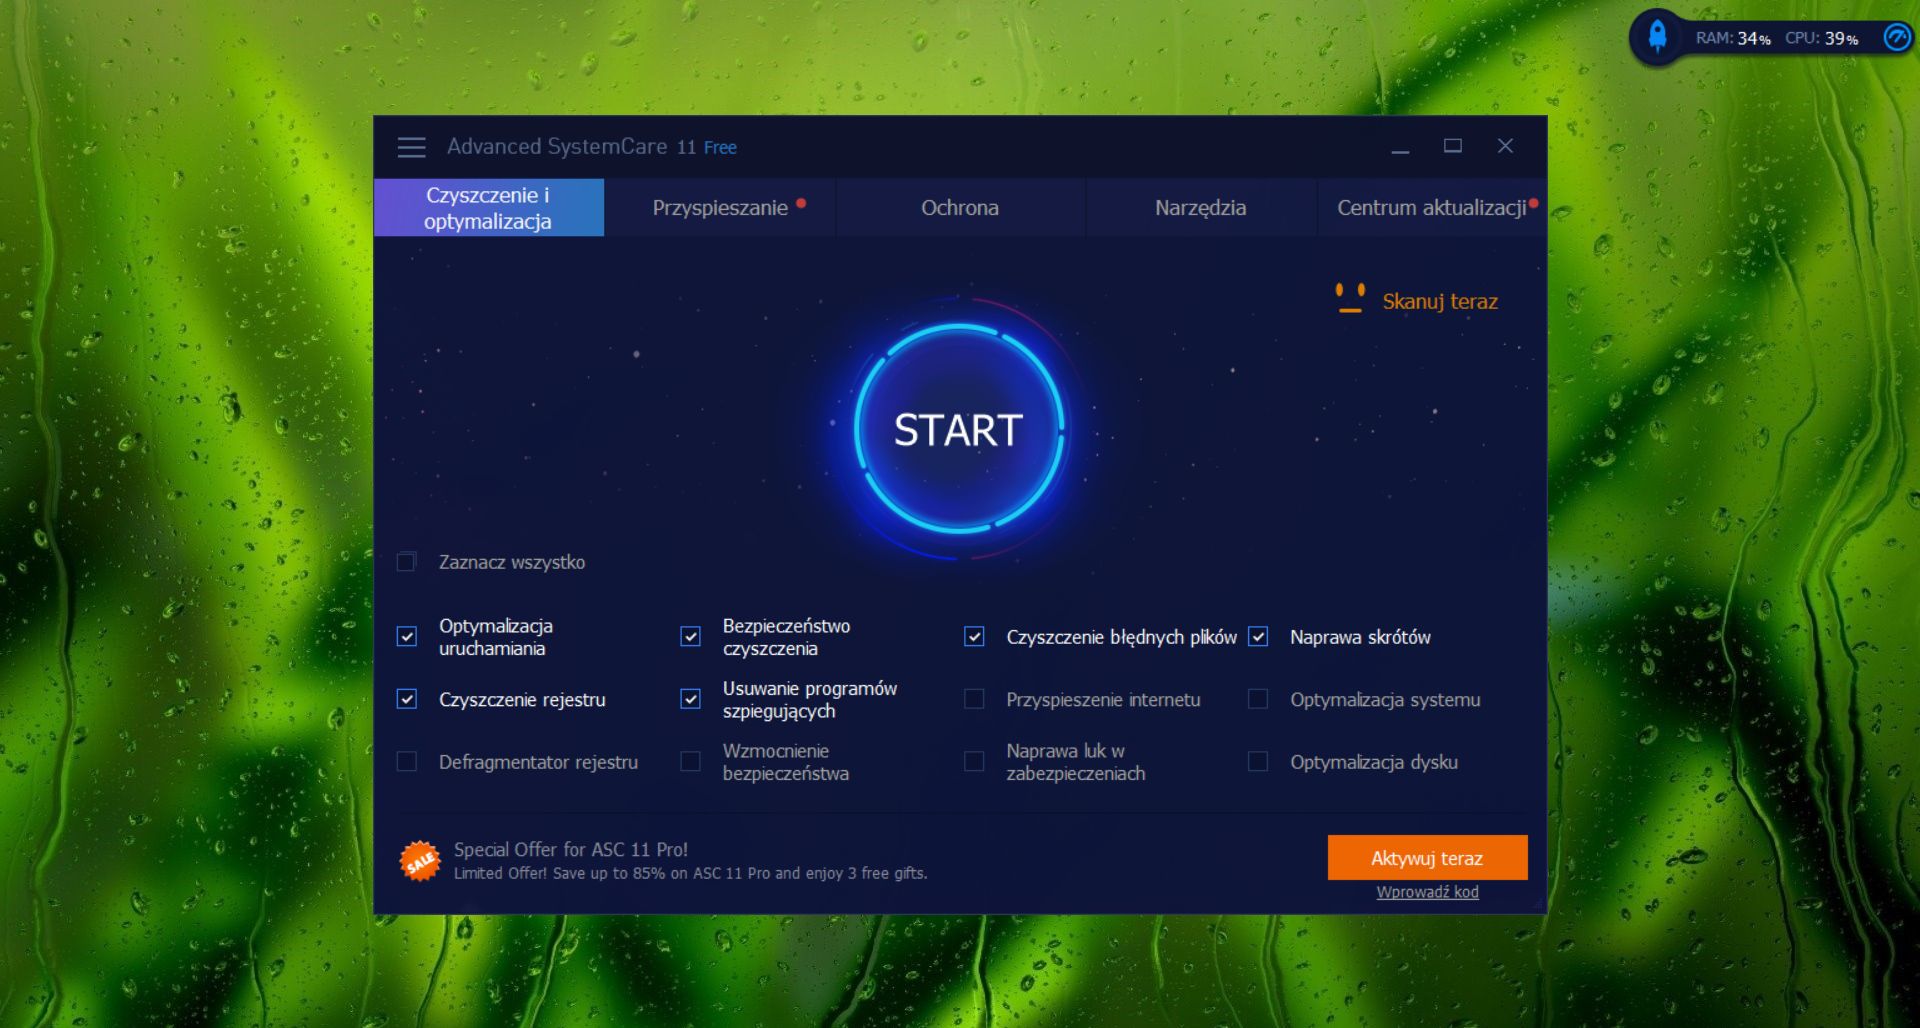 advanced systemcare ultimate free download for windows 10